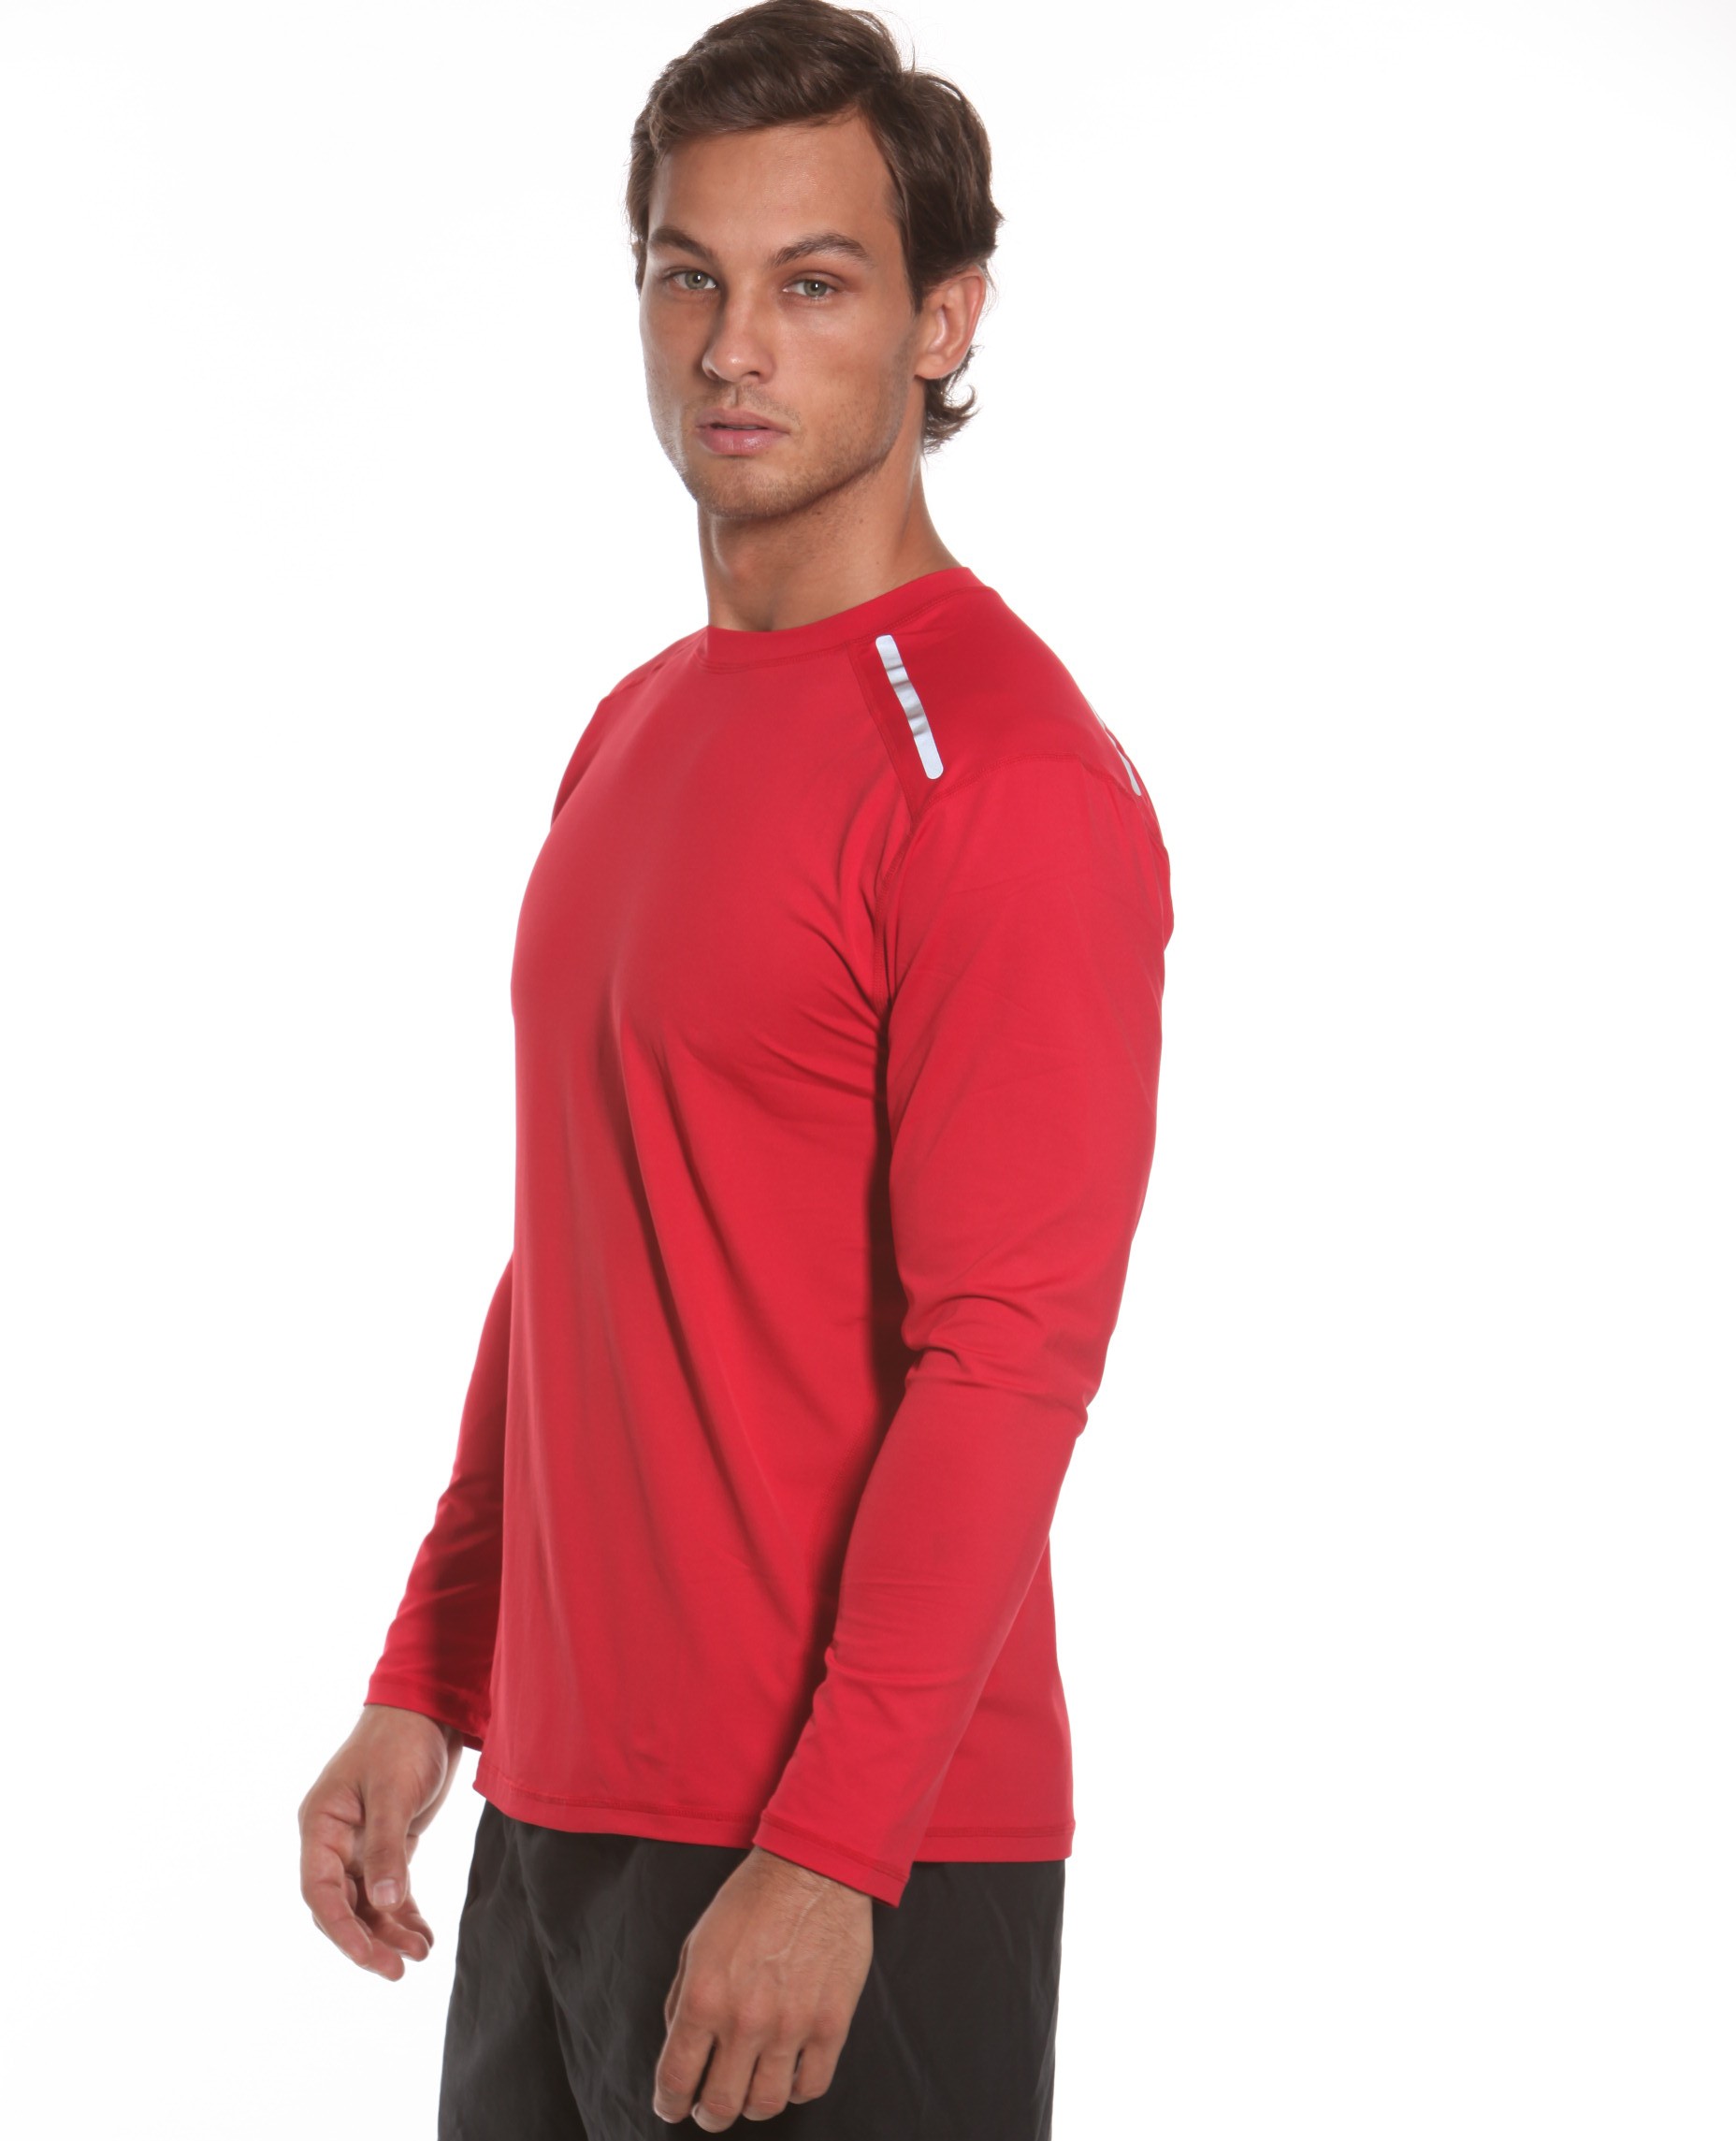 BloqUV Men&amp;apos;s Long-Sleeve Sun Protective Jet Tee (Red)